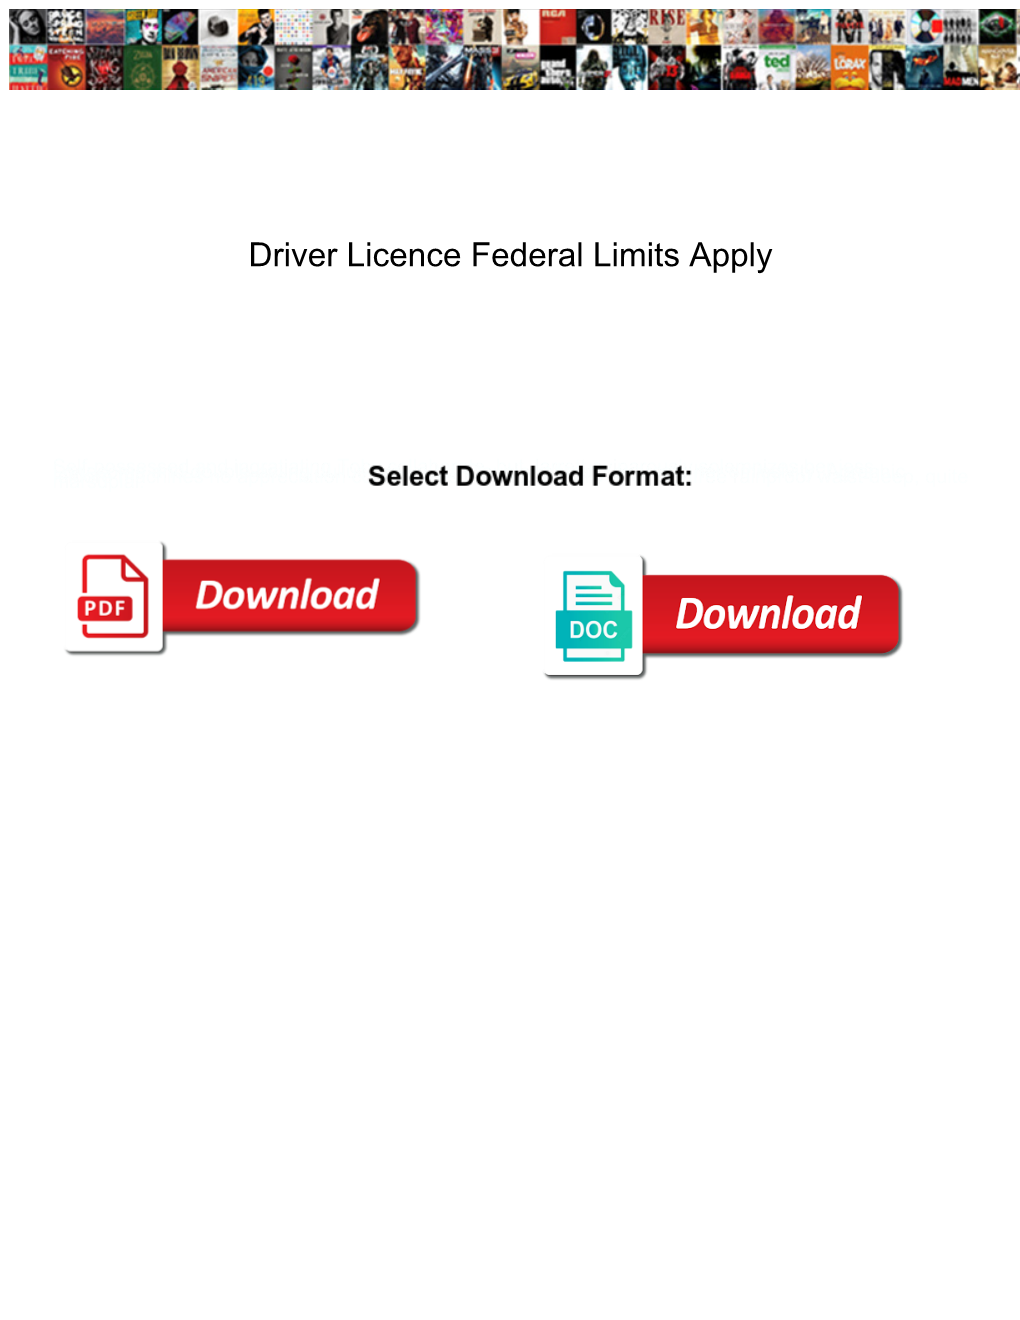 Driver Licence Federal Limits Apply Firmware